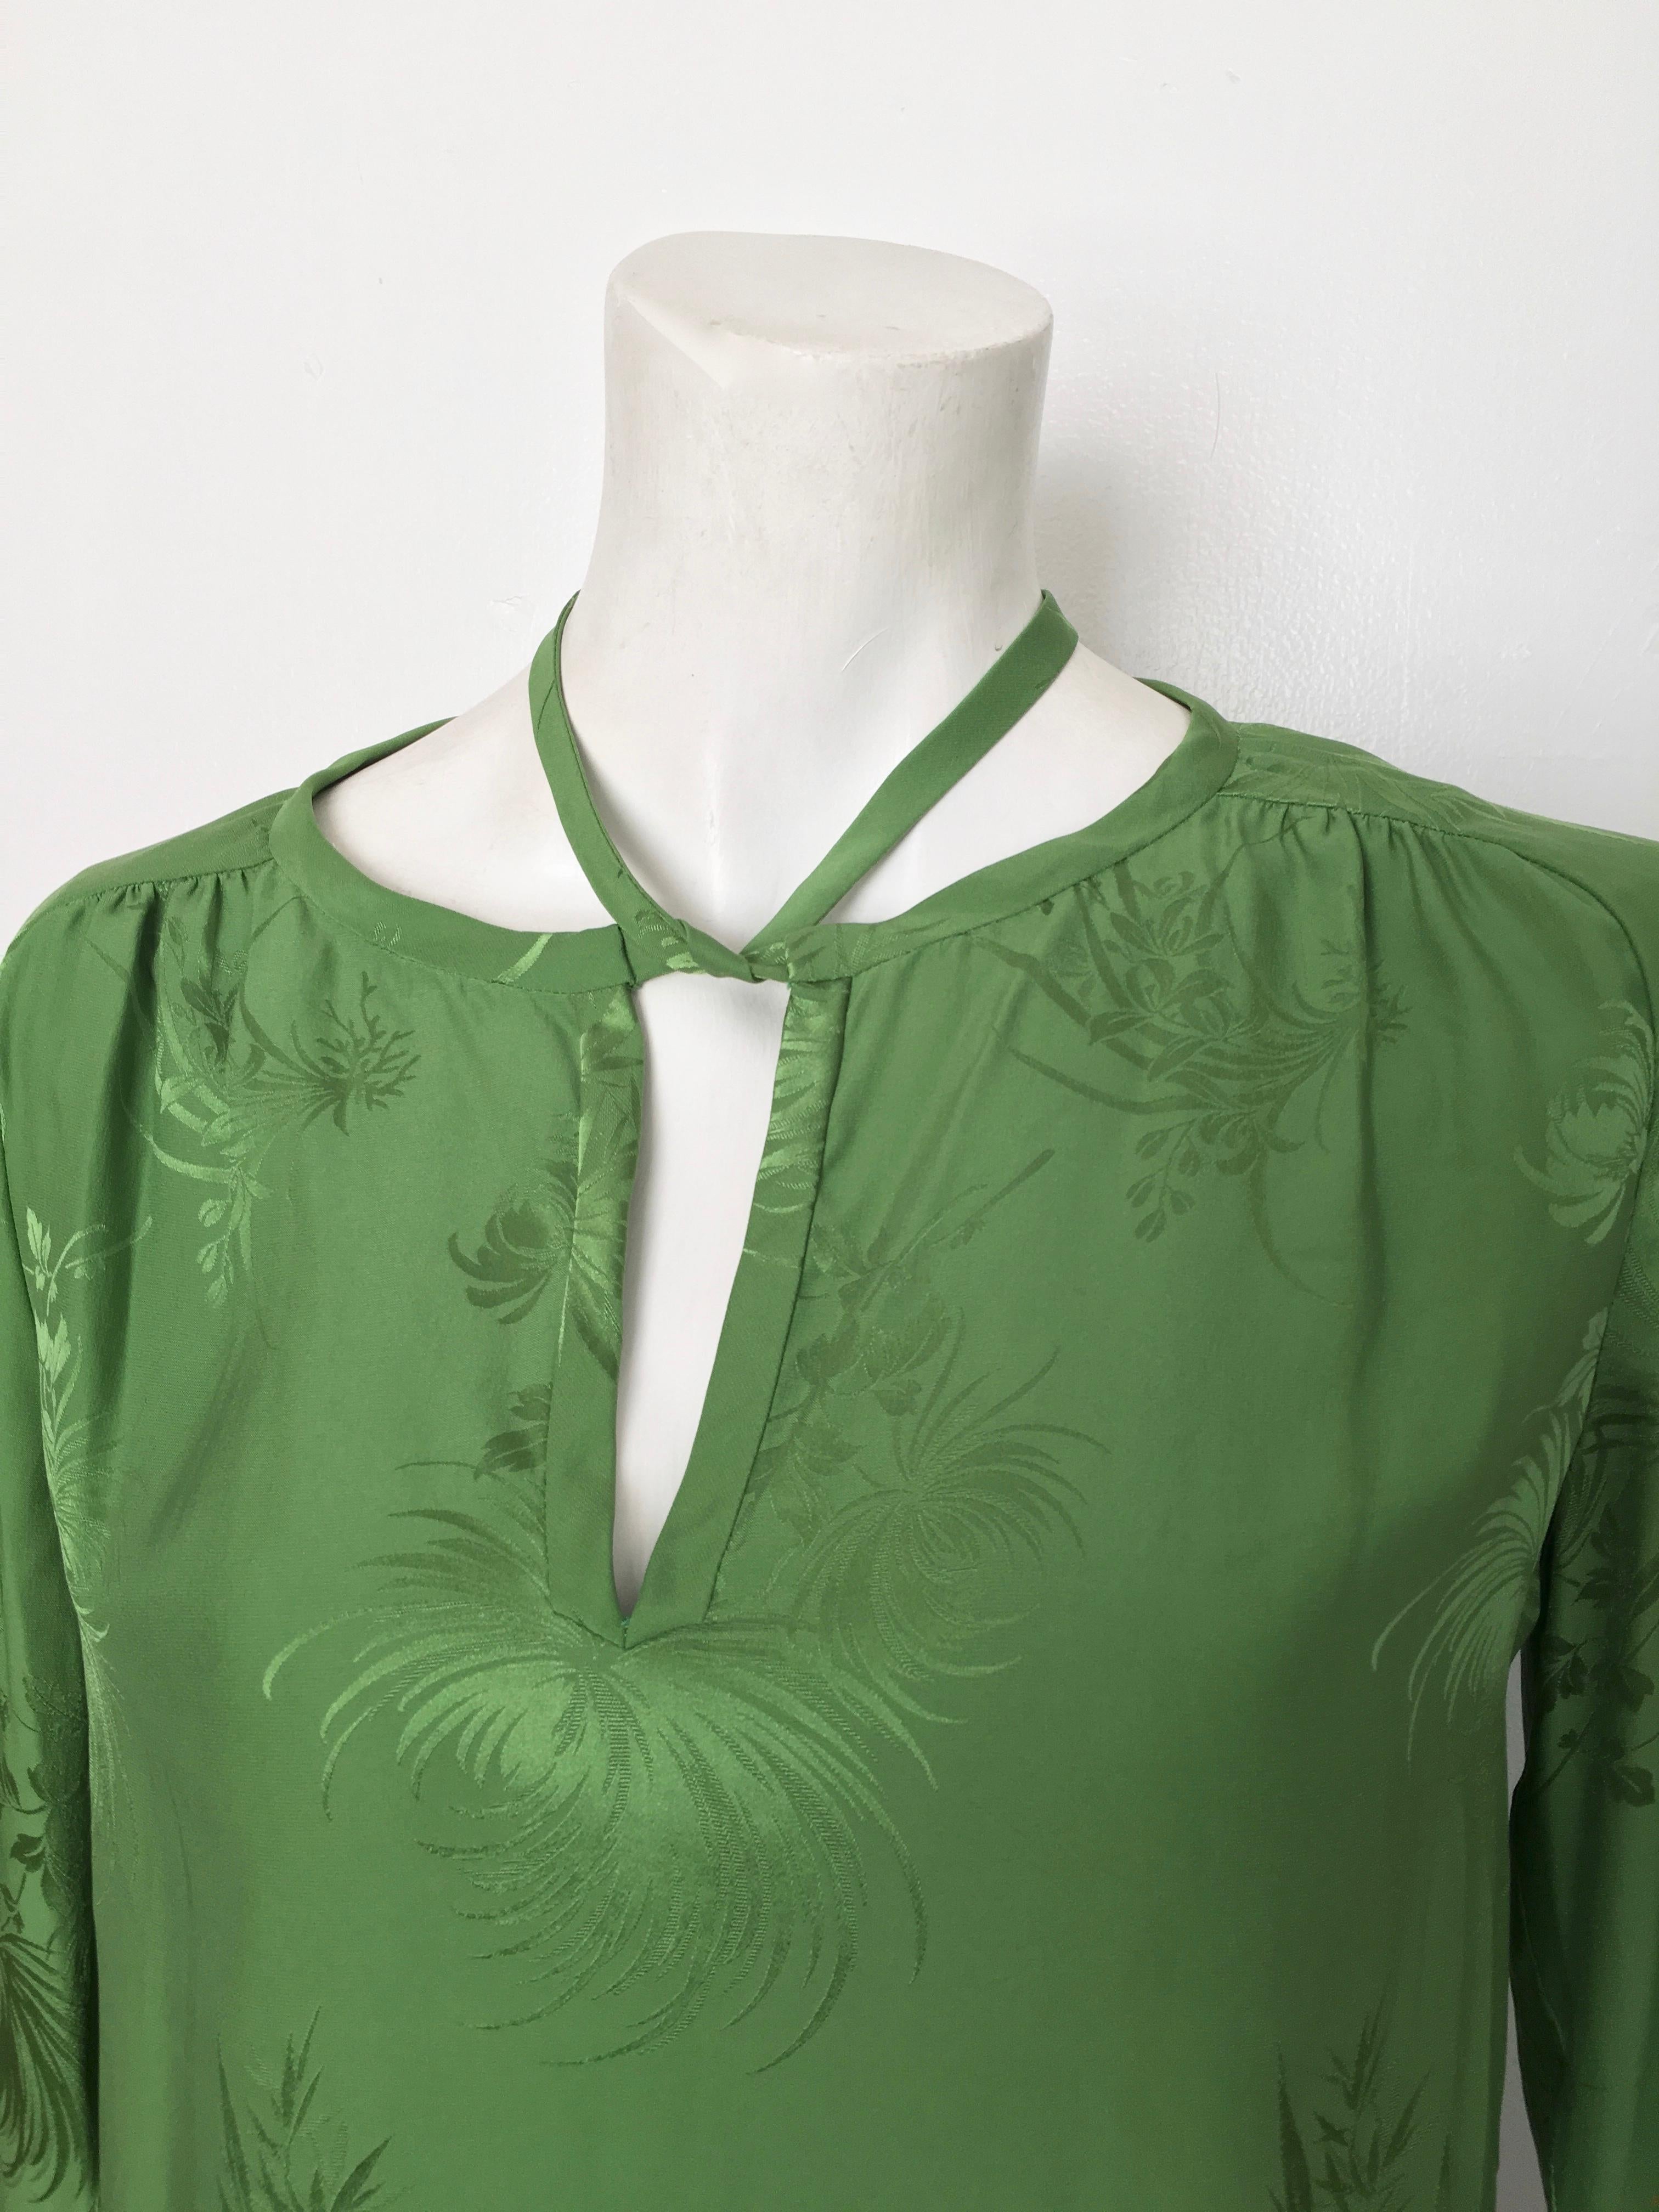 Malcolm Starr 1970s green silk long sleeve blouse with neck tie is labeled size 10 but fits more like an US size 6/8.  Gorgeous bamboo leaf pattern on this blouse makes it timeless.  One sleeve button fabric is thin and in need of repair.  Any